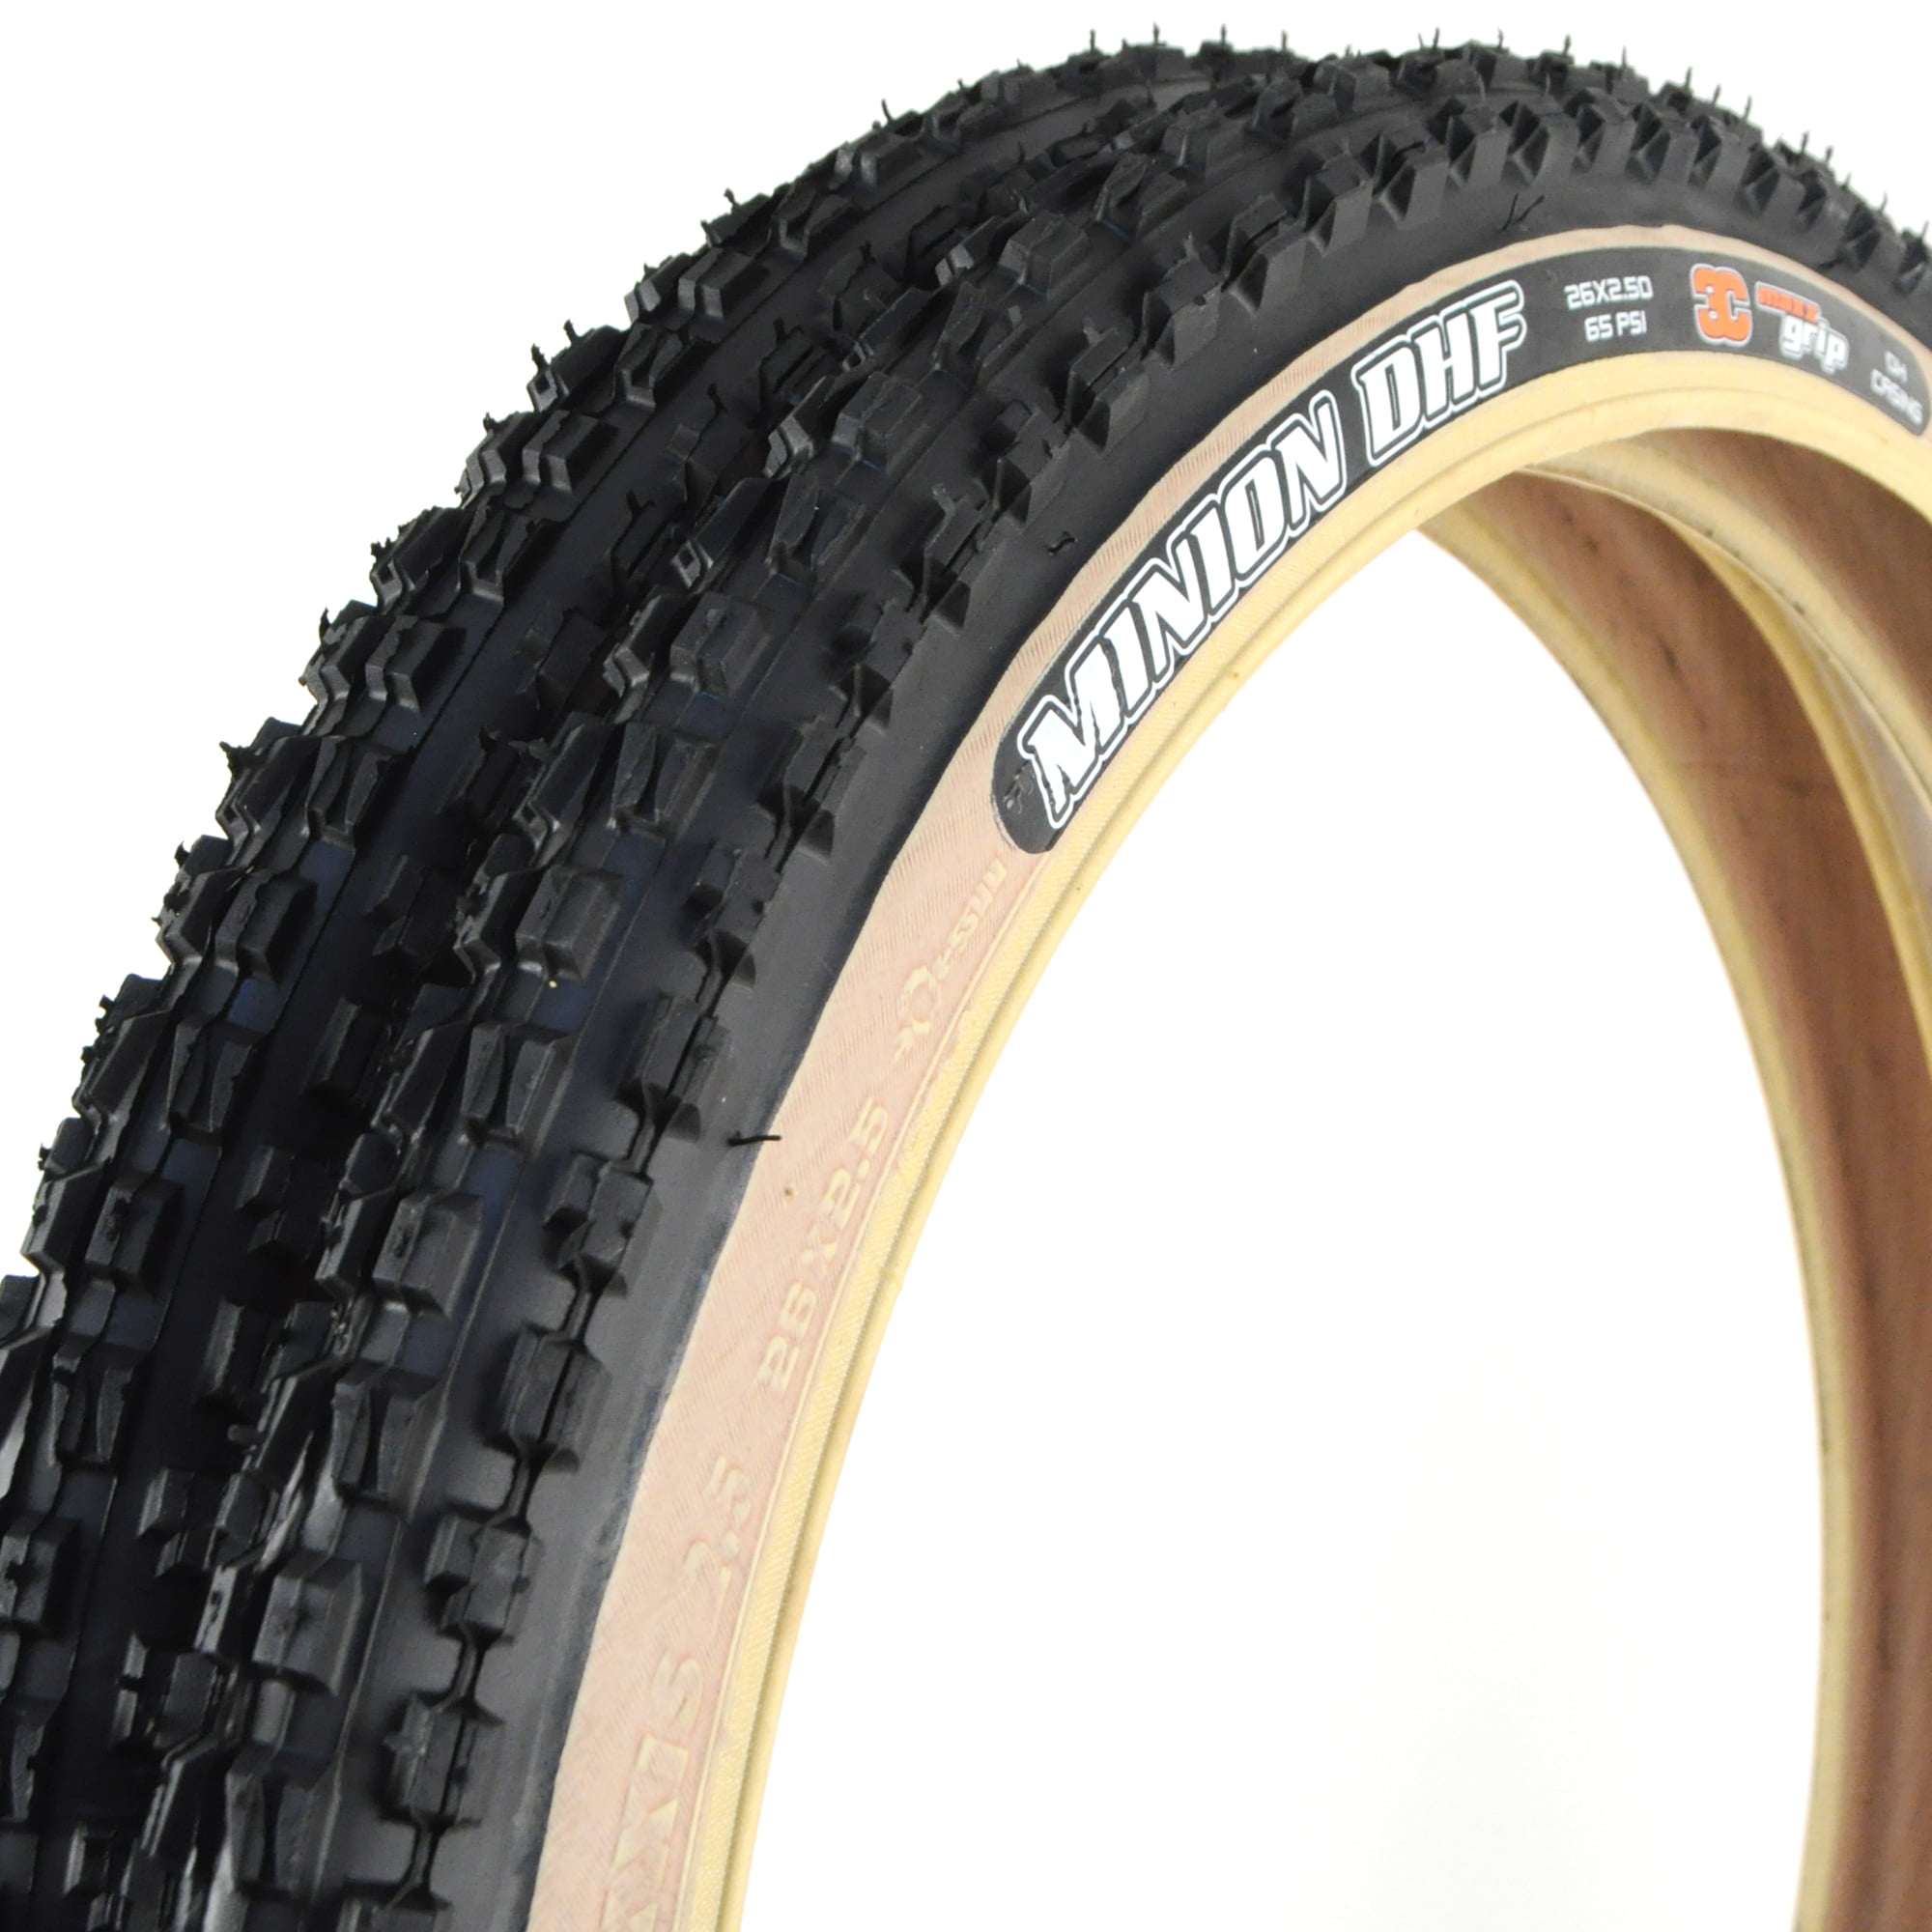 Maxxis Minion DHF 26 x 2.50" 60tpi 3C 2-Ply Skinwall Wire Tire 